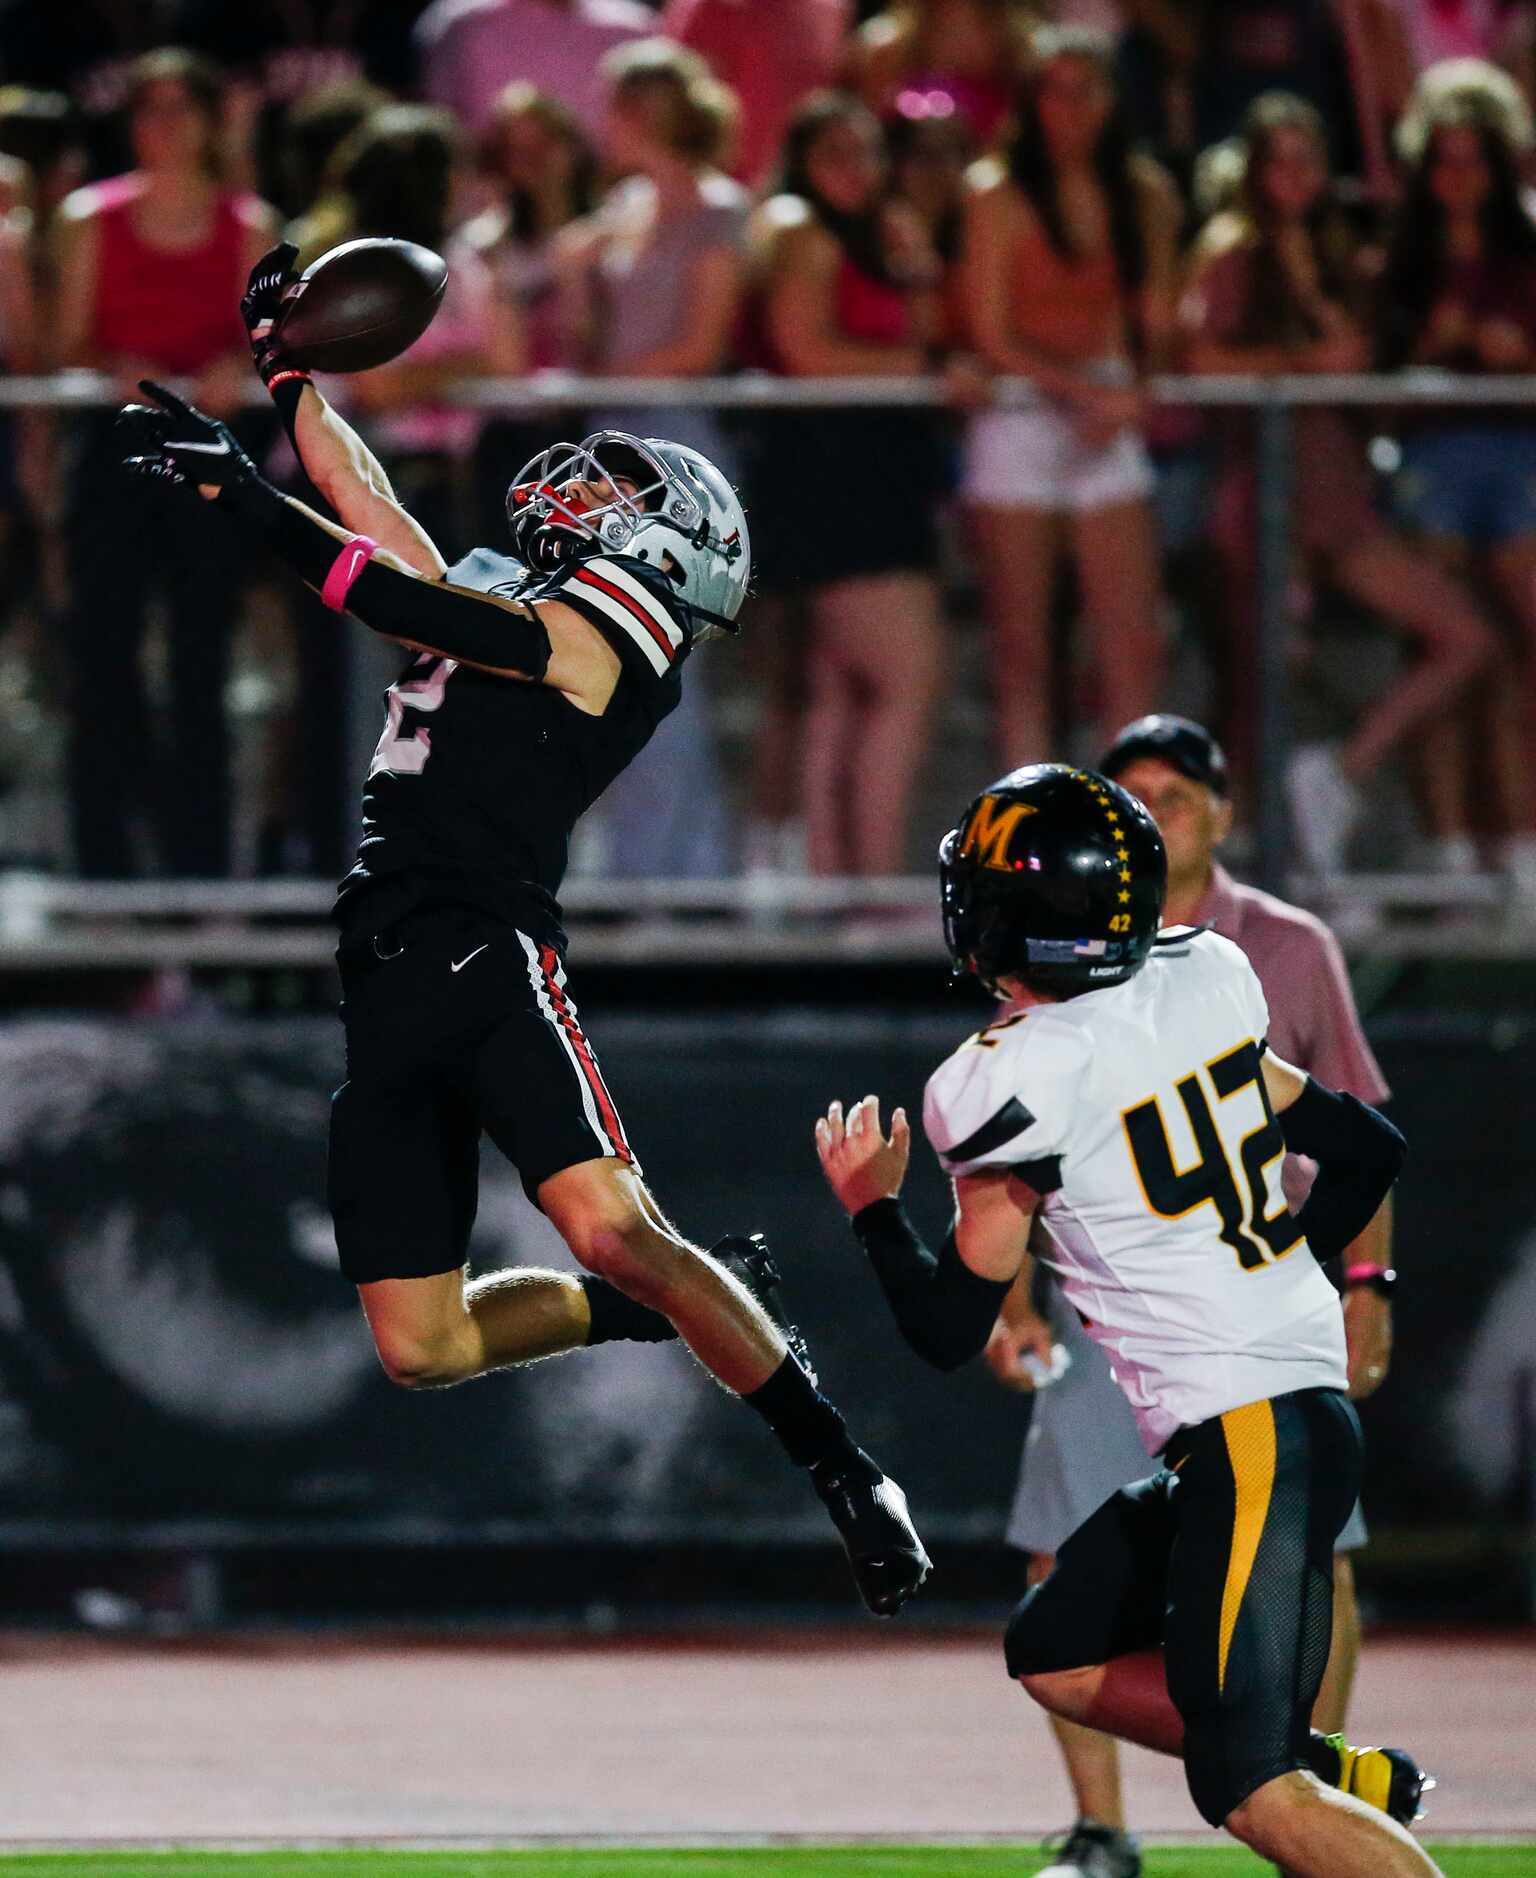 Lovejoy junior wide receiver Jaxson Lavender (2) is unable to catch a pass for a touchdown...